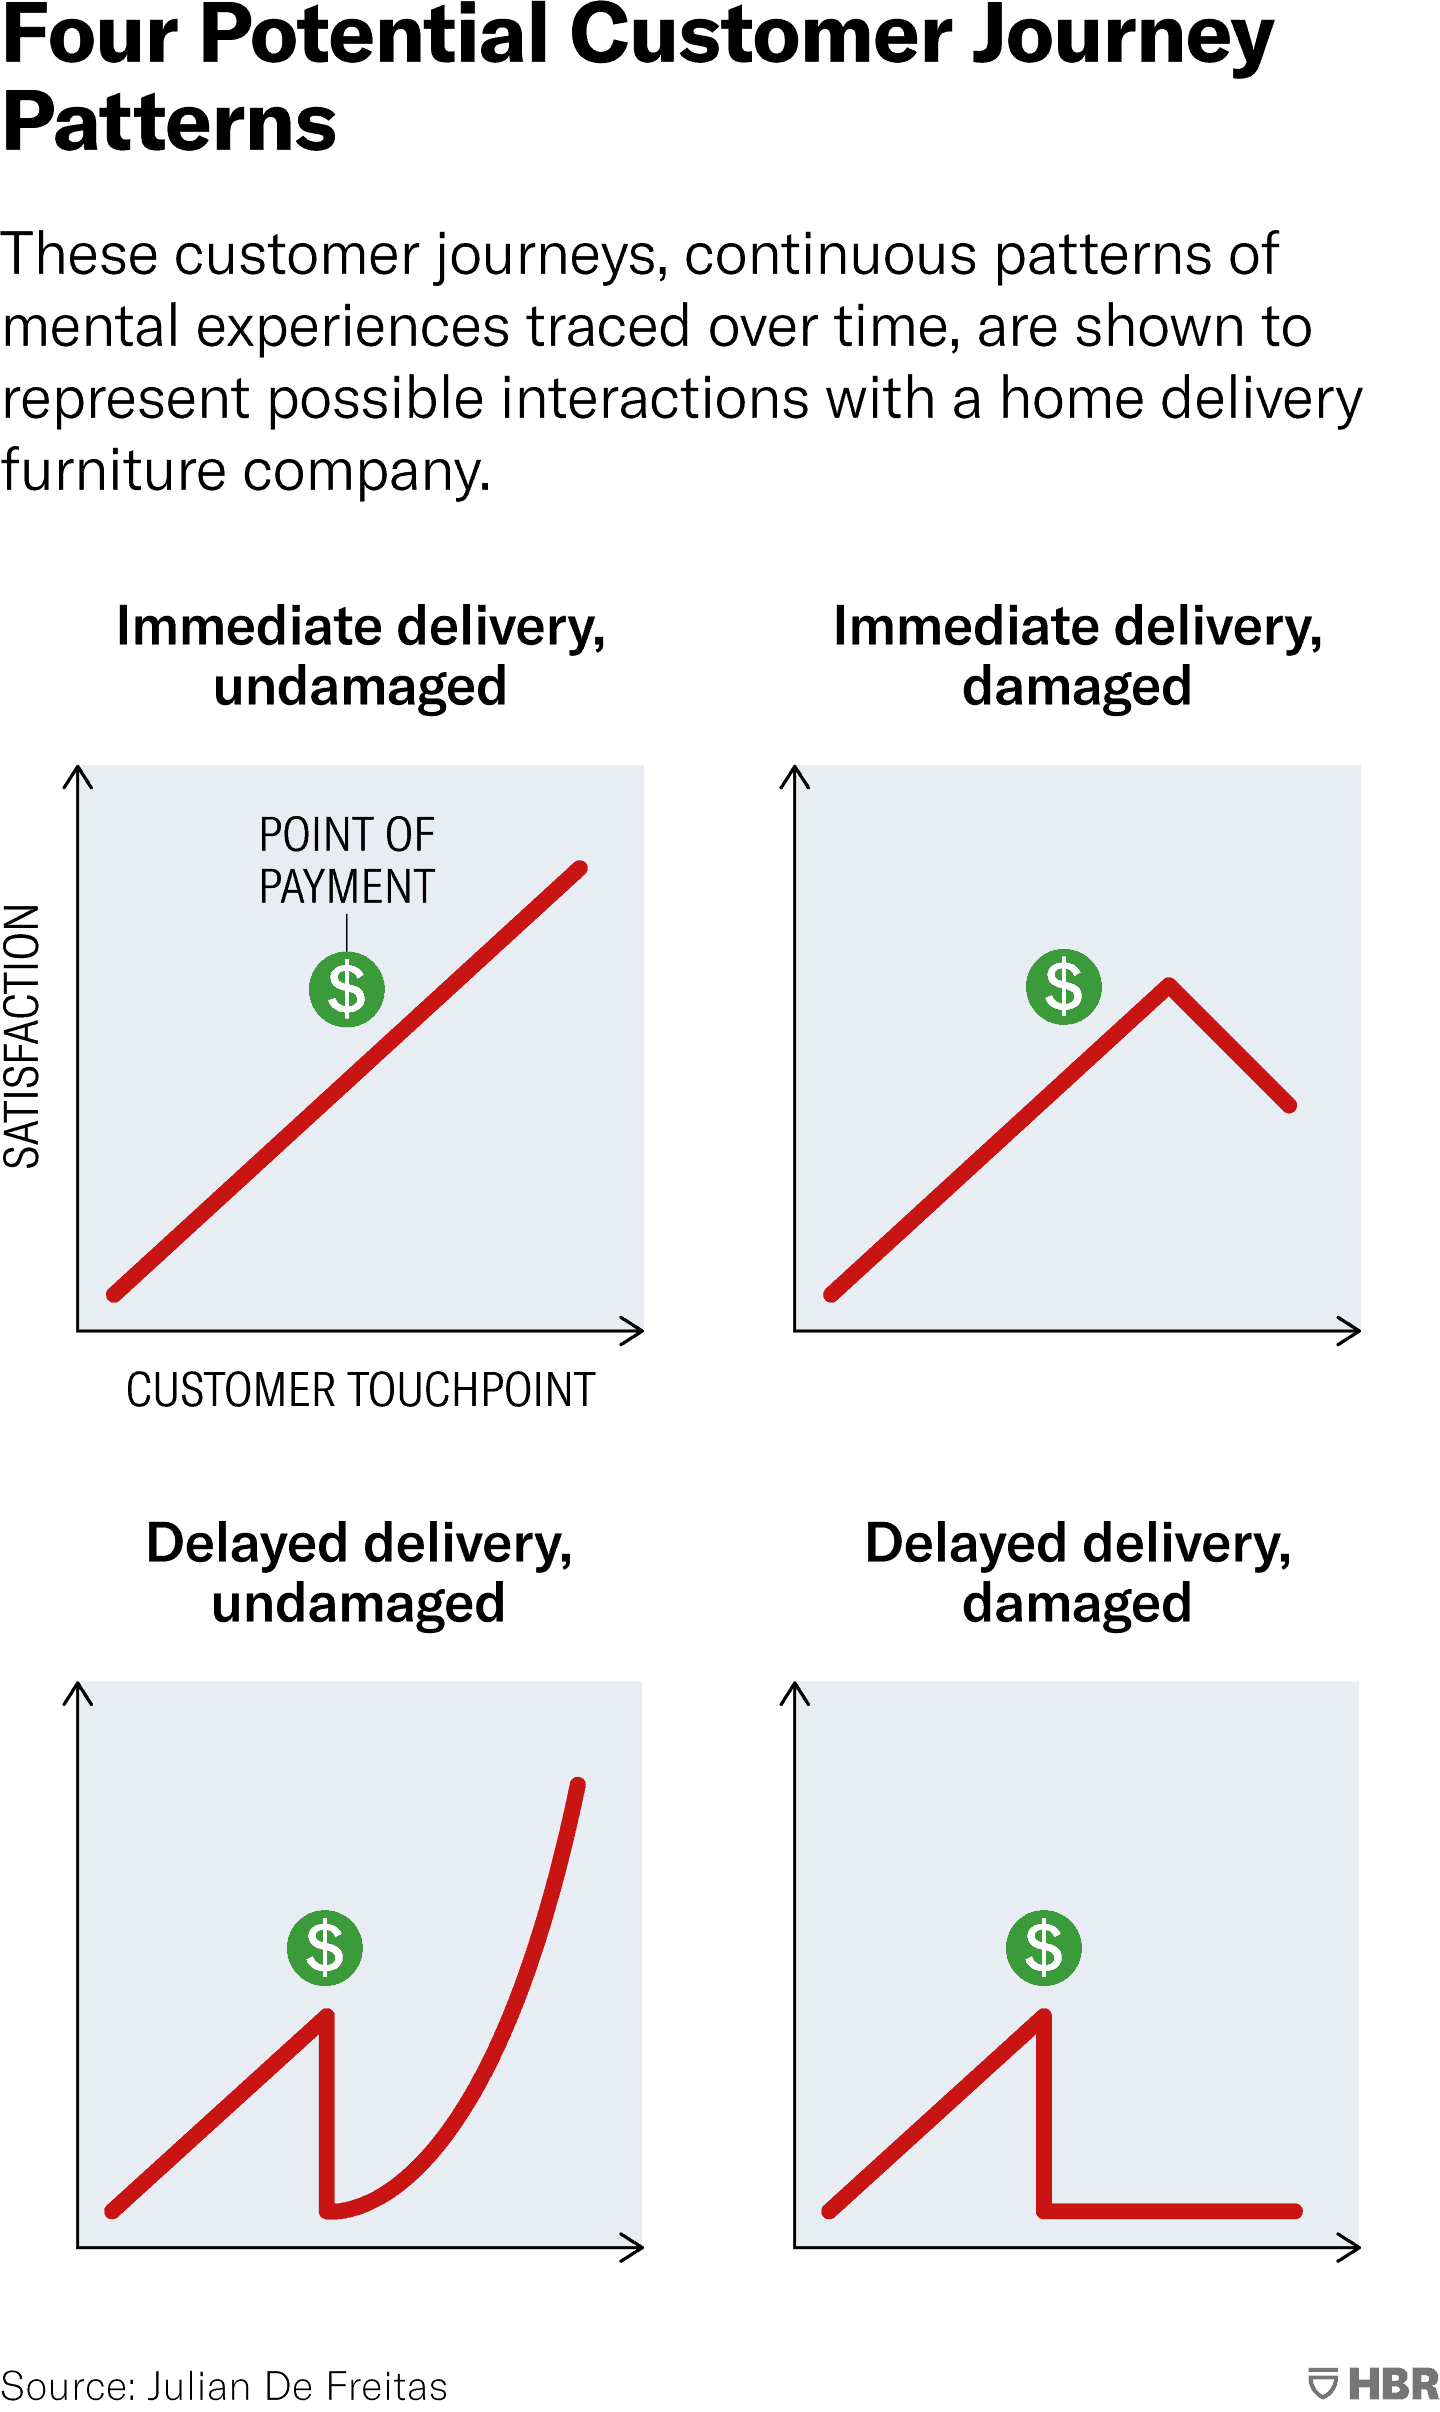 In this set of charts, Four customer journeys, or continuous patterns of mental experiences traced over time, are shown to represent possible interactions with a home delivery furniture company. The customer journey, depicted as one line, is plotted along x and y coordinates, where x is the customer touchpoint and y is the customer’s level of satisfaction. For all journeys, a point of payment icon falls at the halfway point. When furniture is delivered immediately and undamaged, the customer satisfaction rises continuously, unbroken, at a 45 degree angle. When furniture is delivered immediately, but is damaged, the satisfaction angles downward directly following the point of payment. When the delivery of furniture is delayed but it is undamaged, satisfaction plummets dramatically at the point of payment, but steadily recovers over time. When the delivery is delayed and the furniture is damaged, satisfaction plummets dramatically at the point of payment and does not recover. Source: Julian De Freitas